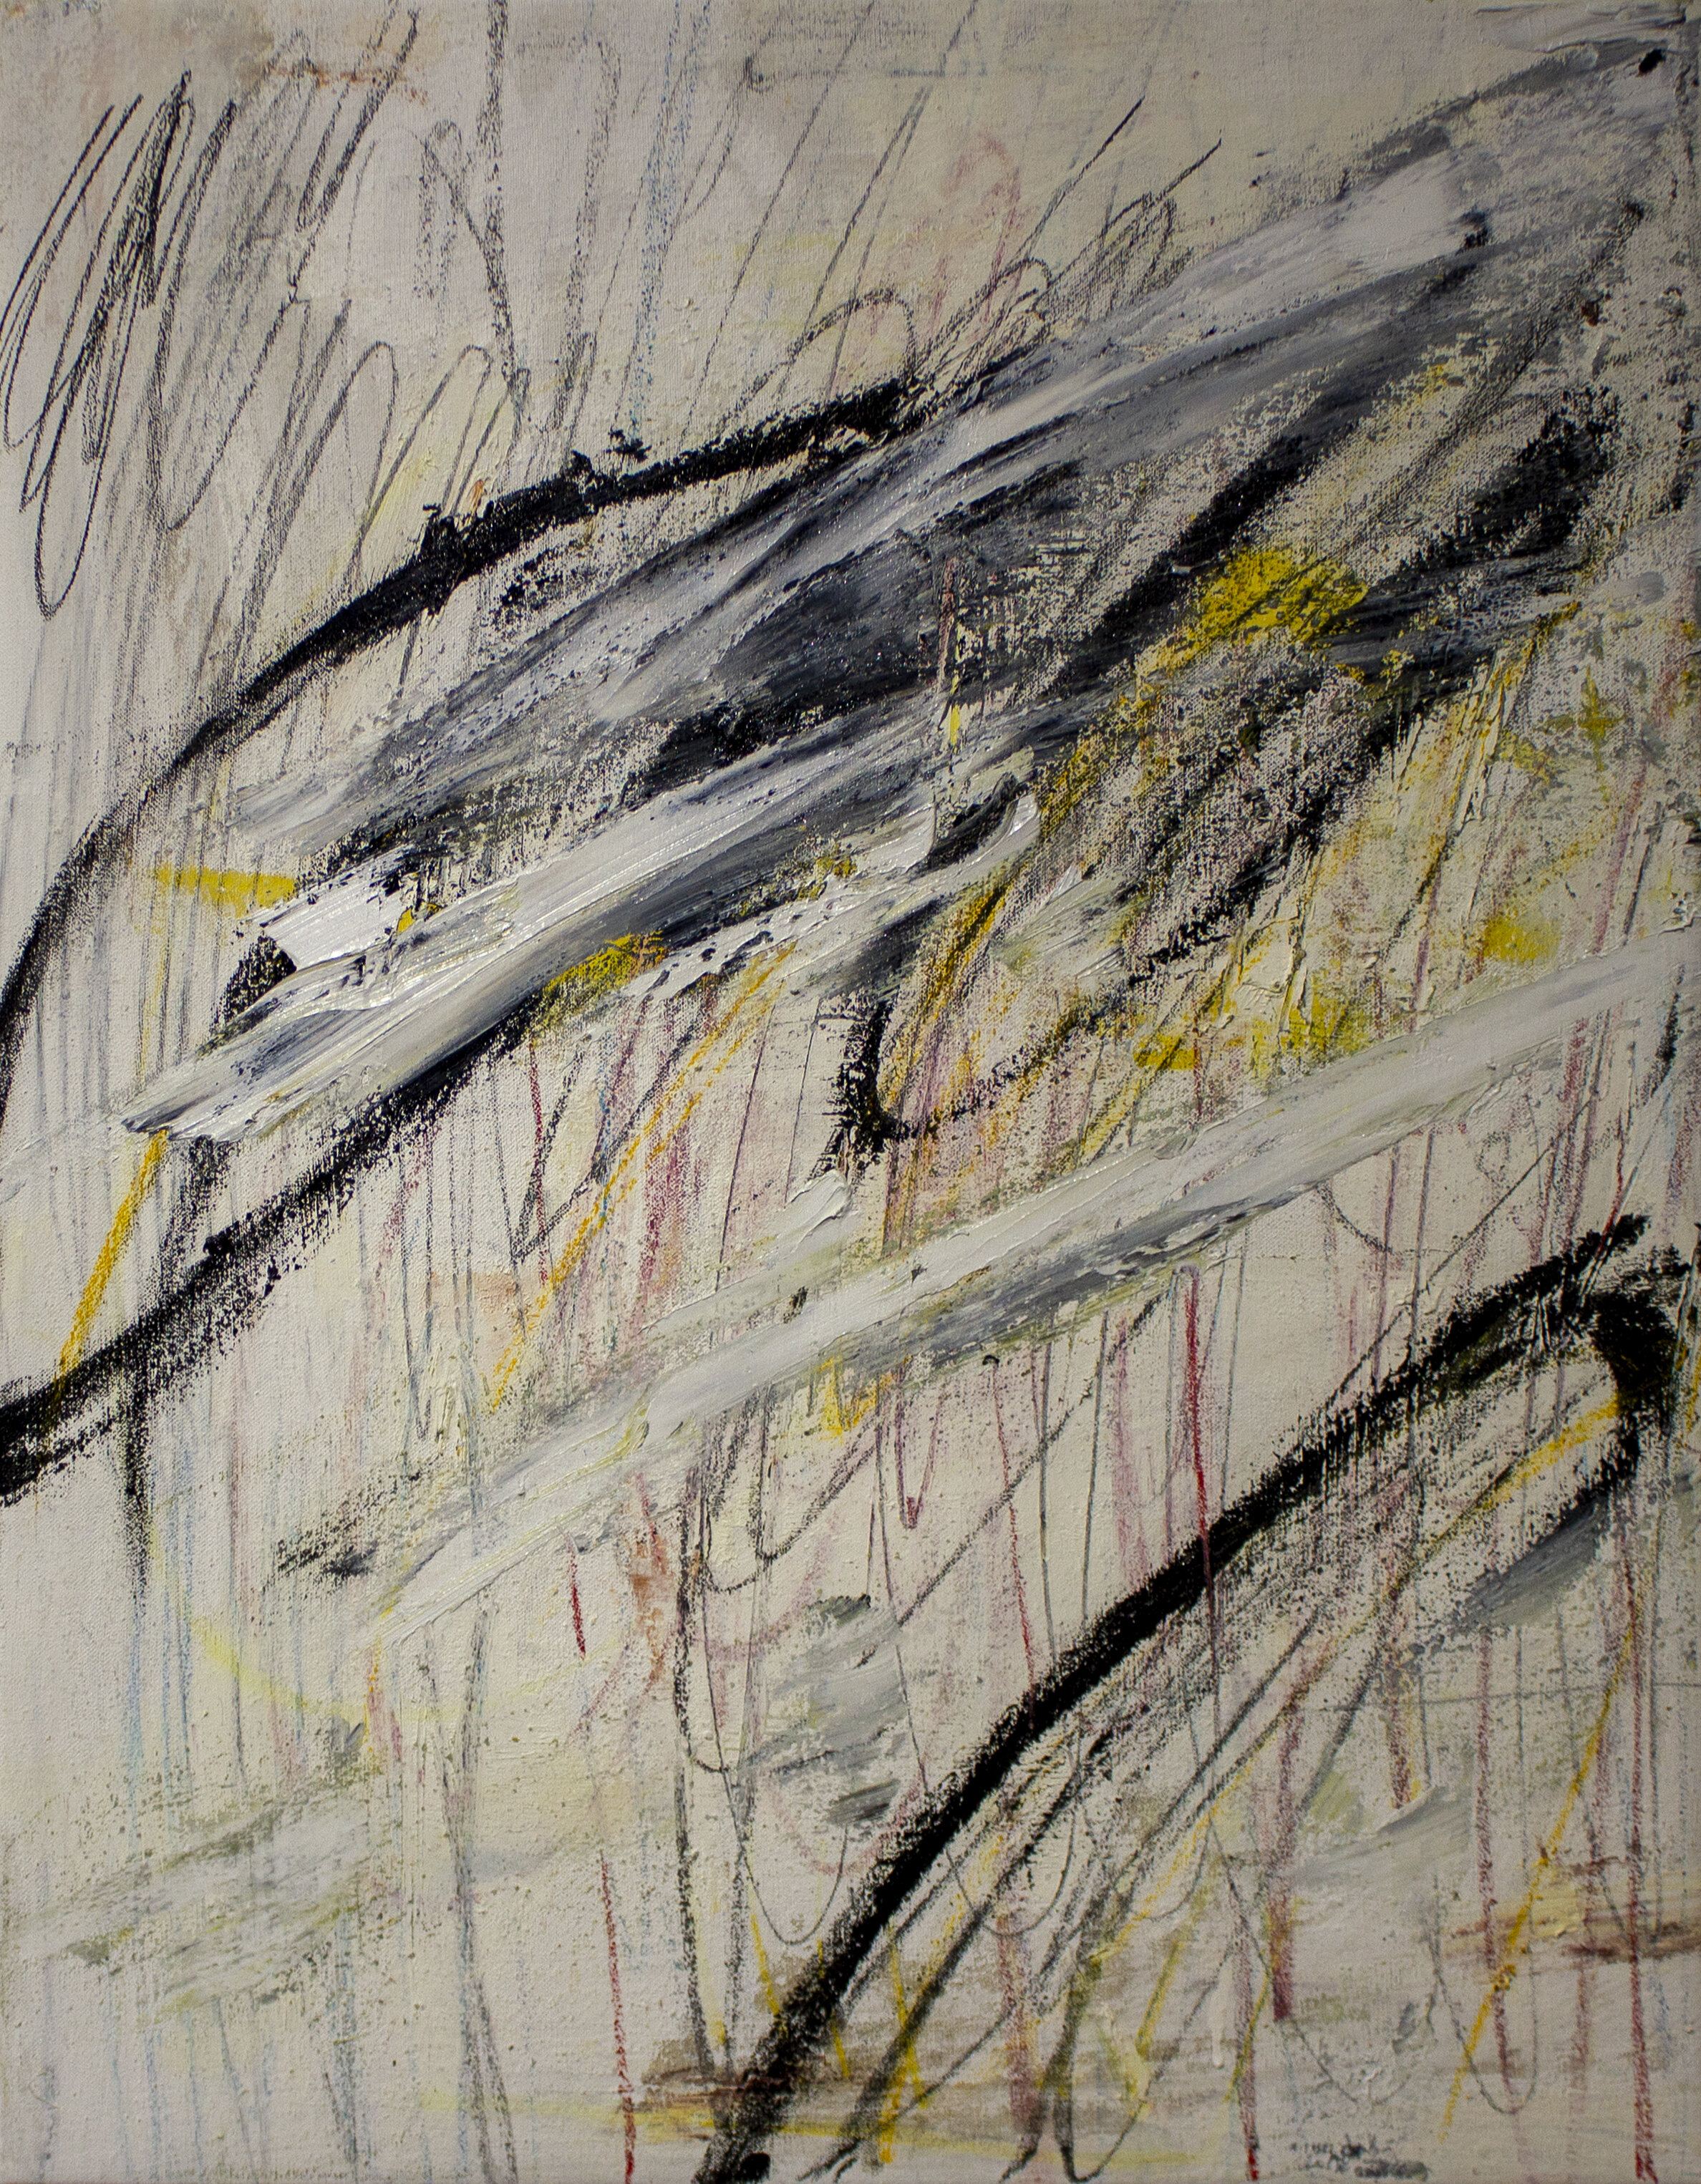   Lebenswelt , 2021  28 x 22 Inches  Oil, Acrylic, Colored Pencil, Chalk Pastel, Oil Pastel, Crayon, Graphite, and Charcoal on Canvas  Private Collection 